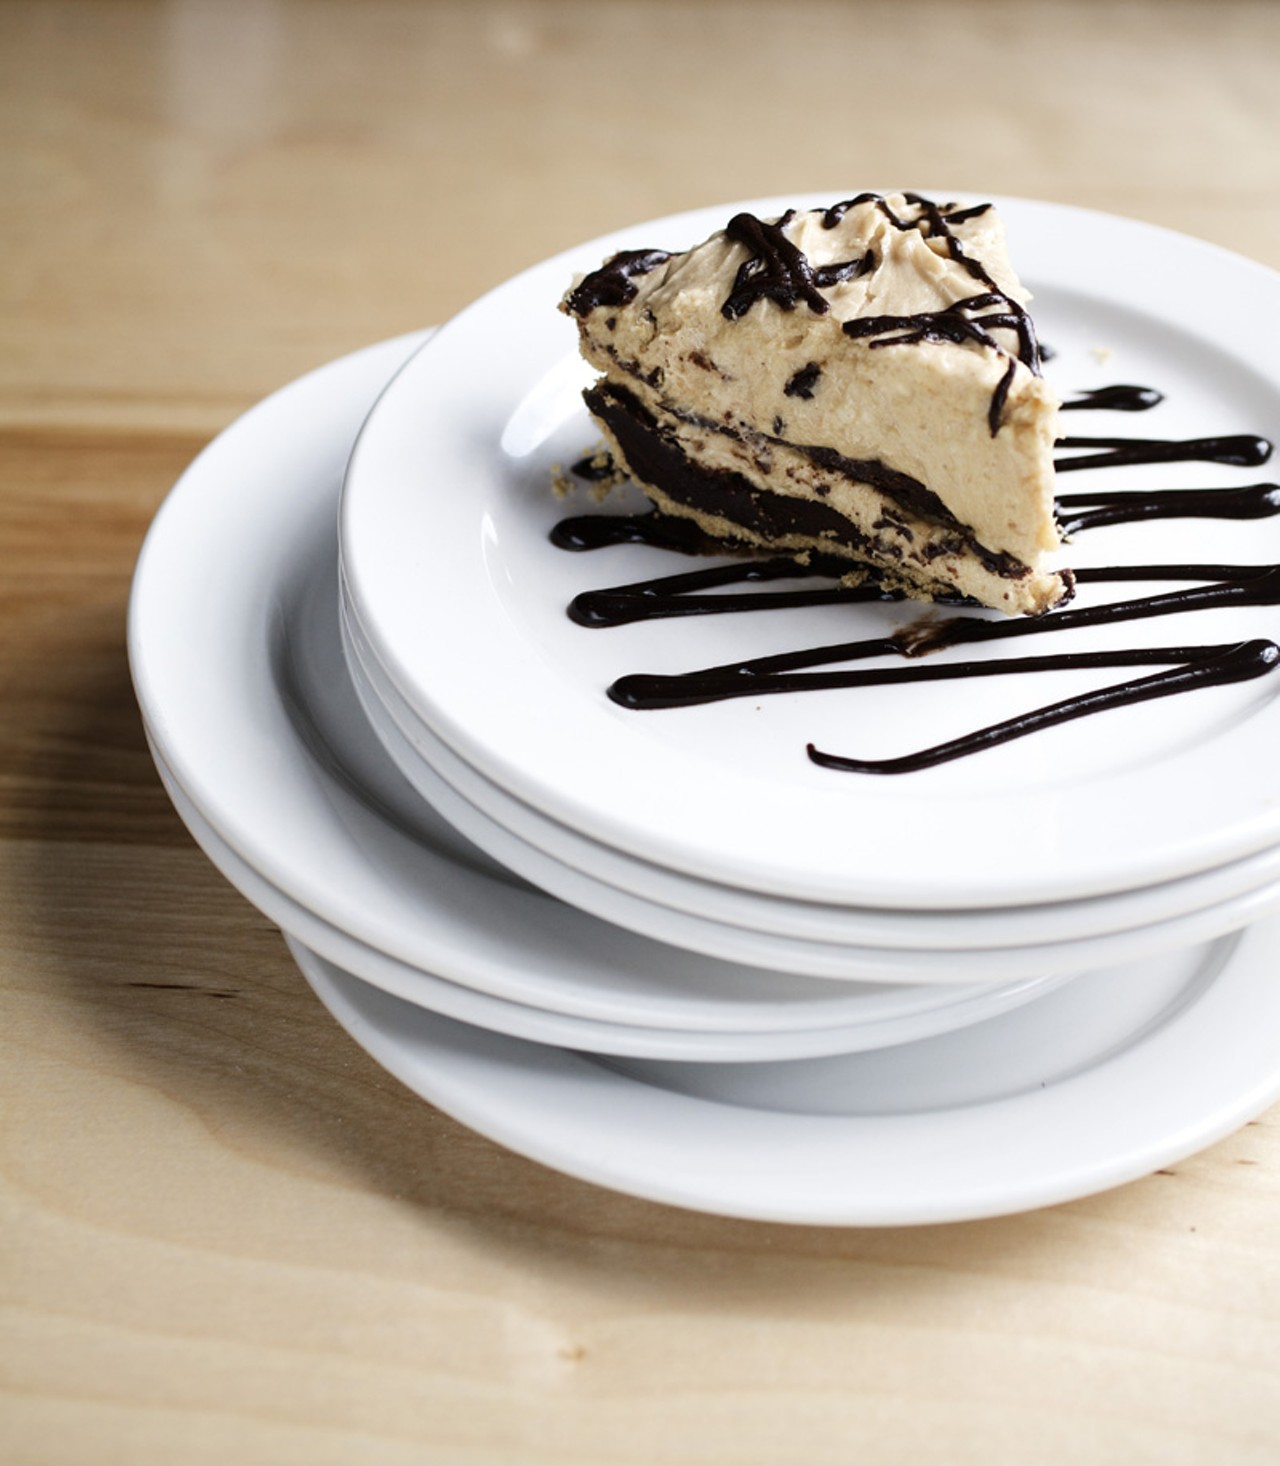 For dessert, you may choose the Peanut Butter Satin Pie with chocolate ganache.